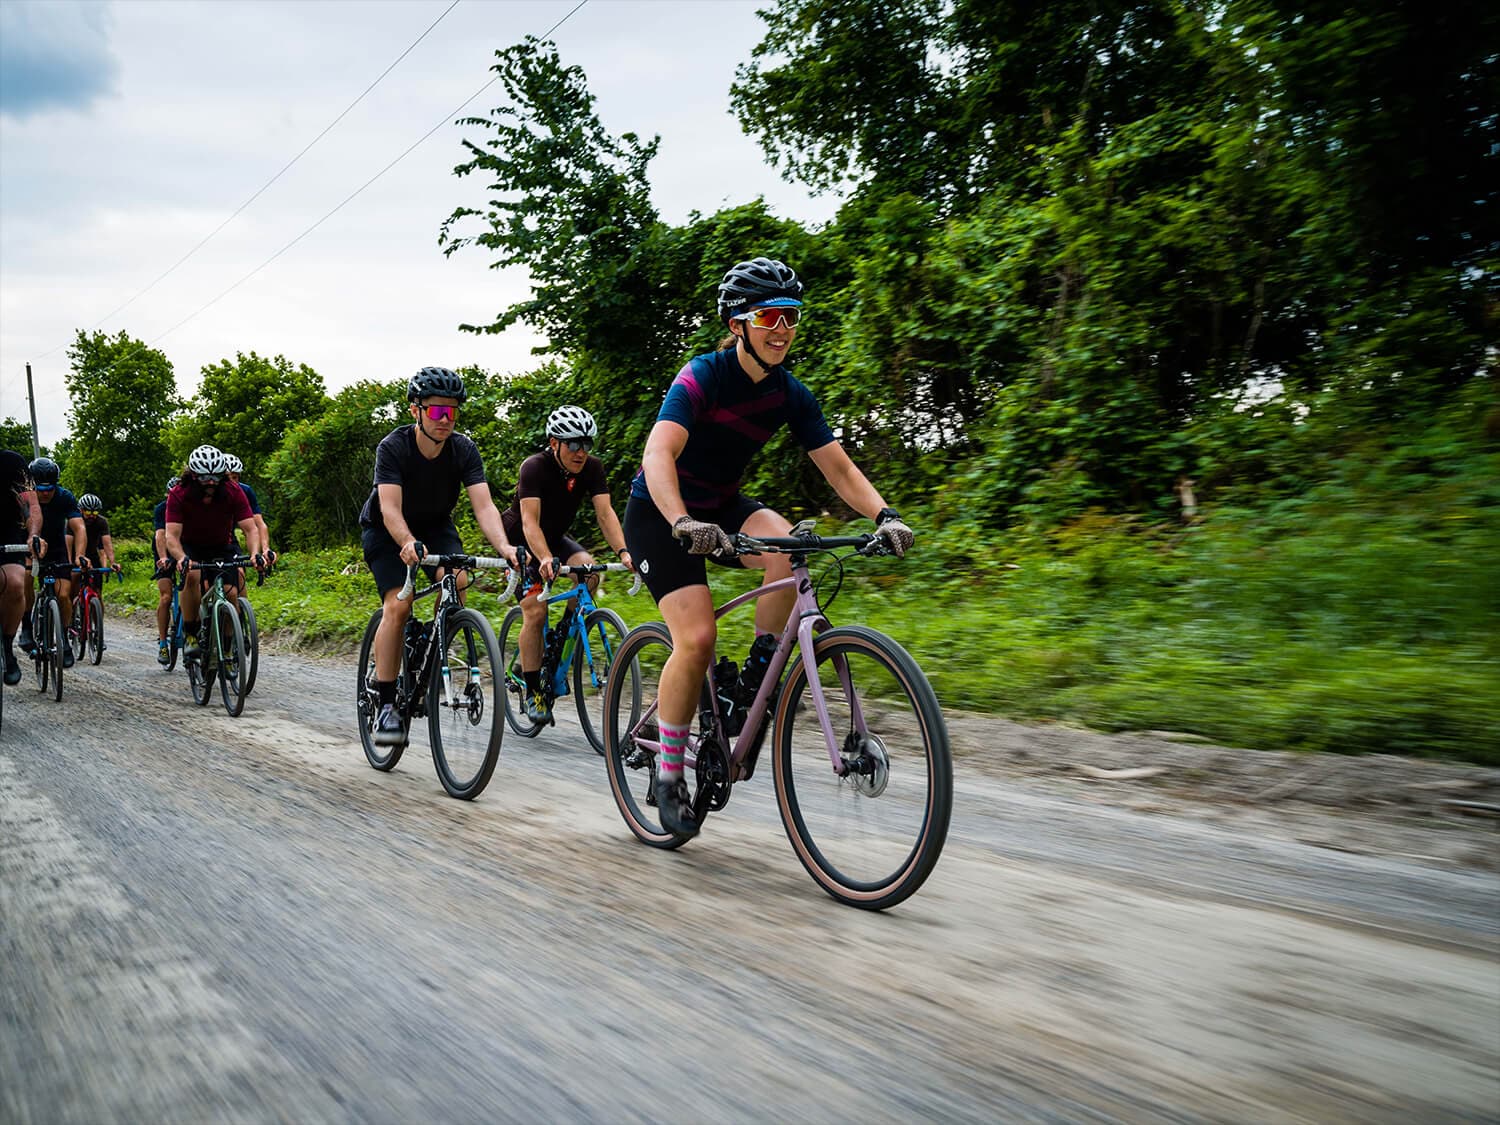 Female on pink Gravel bike leading the pack on a group gravel ride